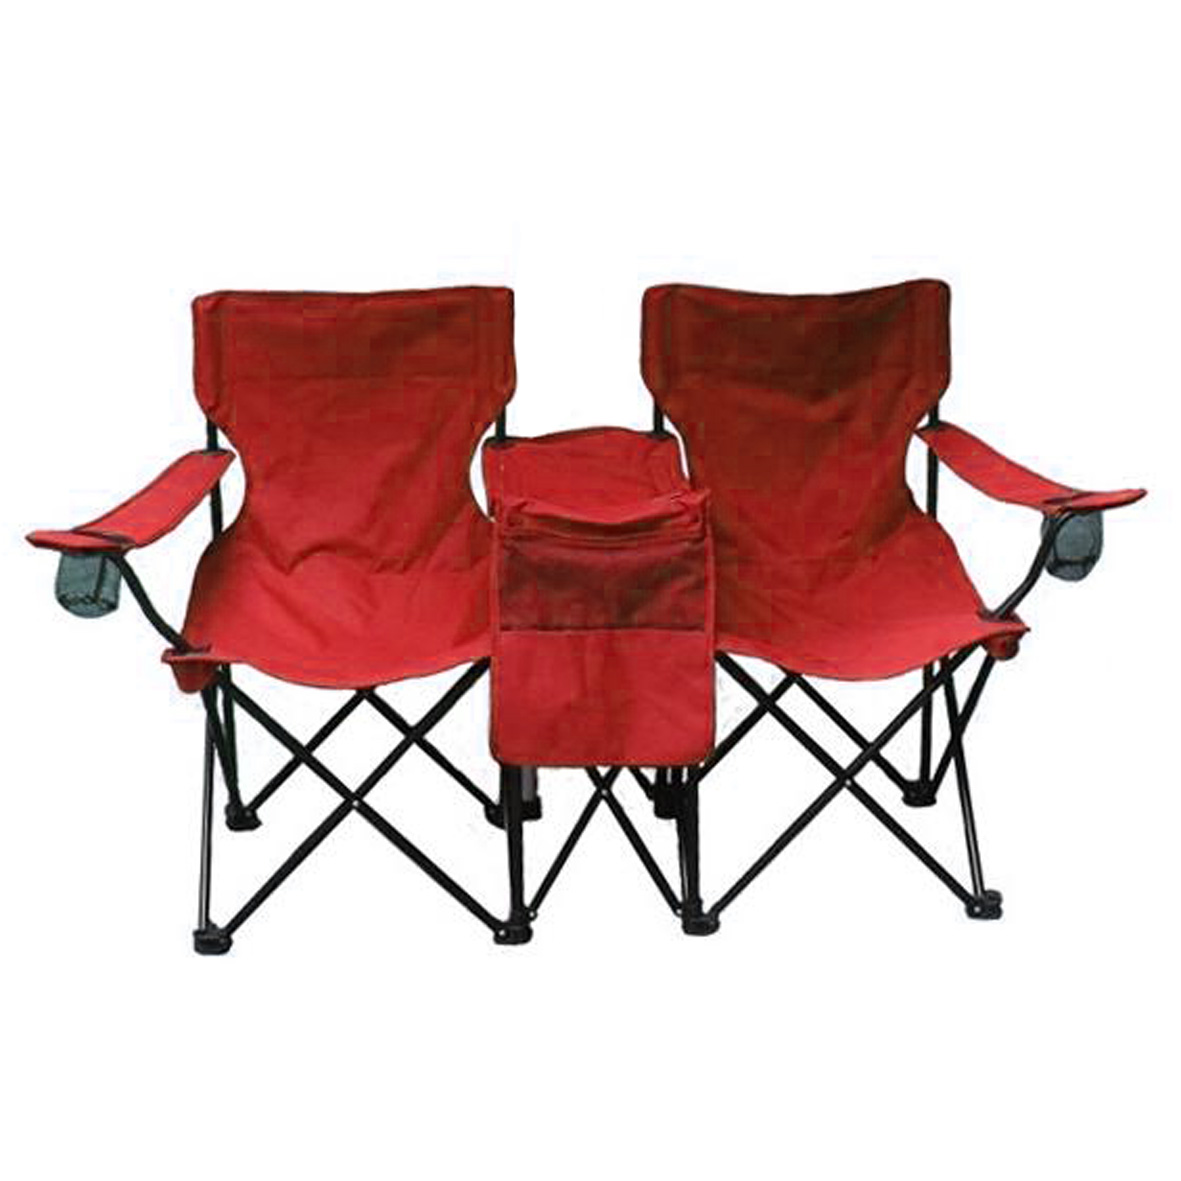 GL-AAA1357 Folding Beach Chair for Two Person with Newspaper Pocket